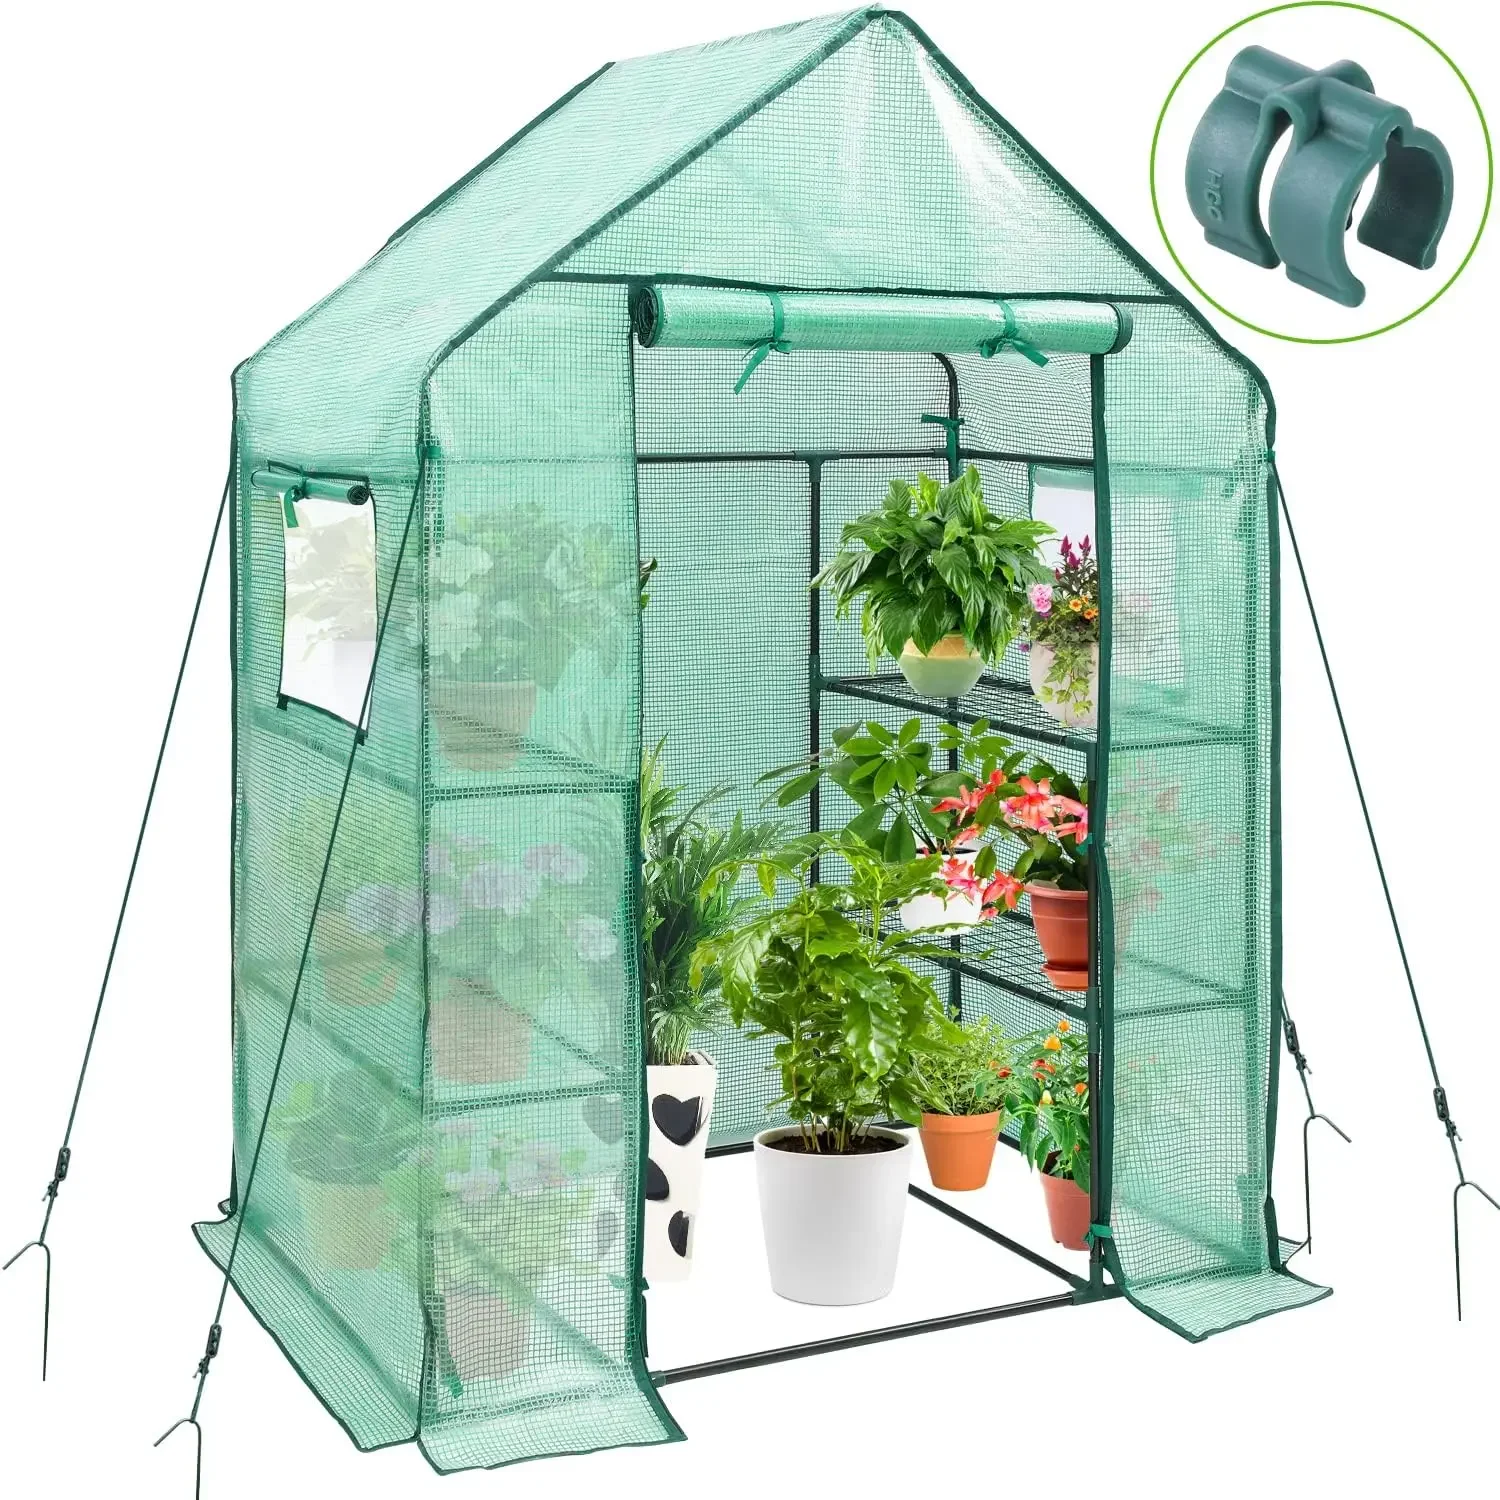 

Greenhouse for Outdoors with Mesh Side Windows,3 Tiers 4 Shelves Small Walk-In Green House Plant for Seedling Flowers Growing